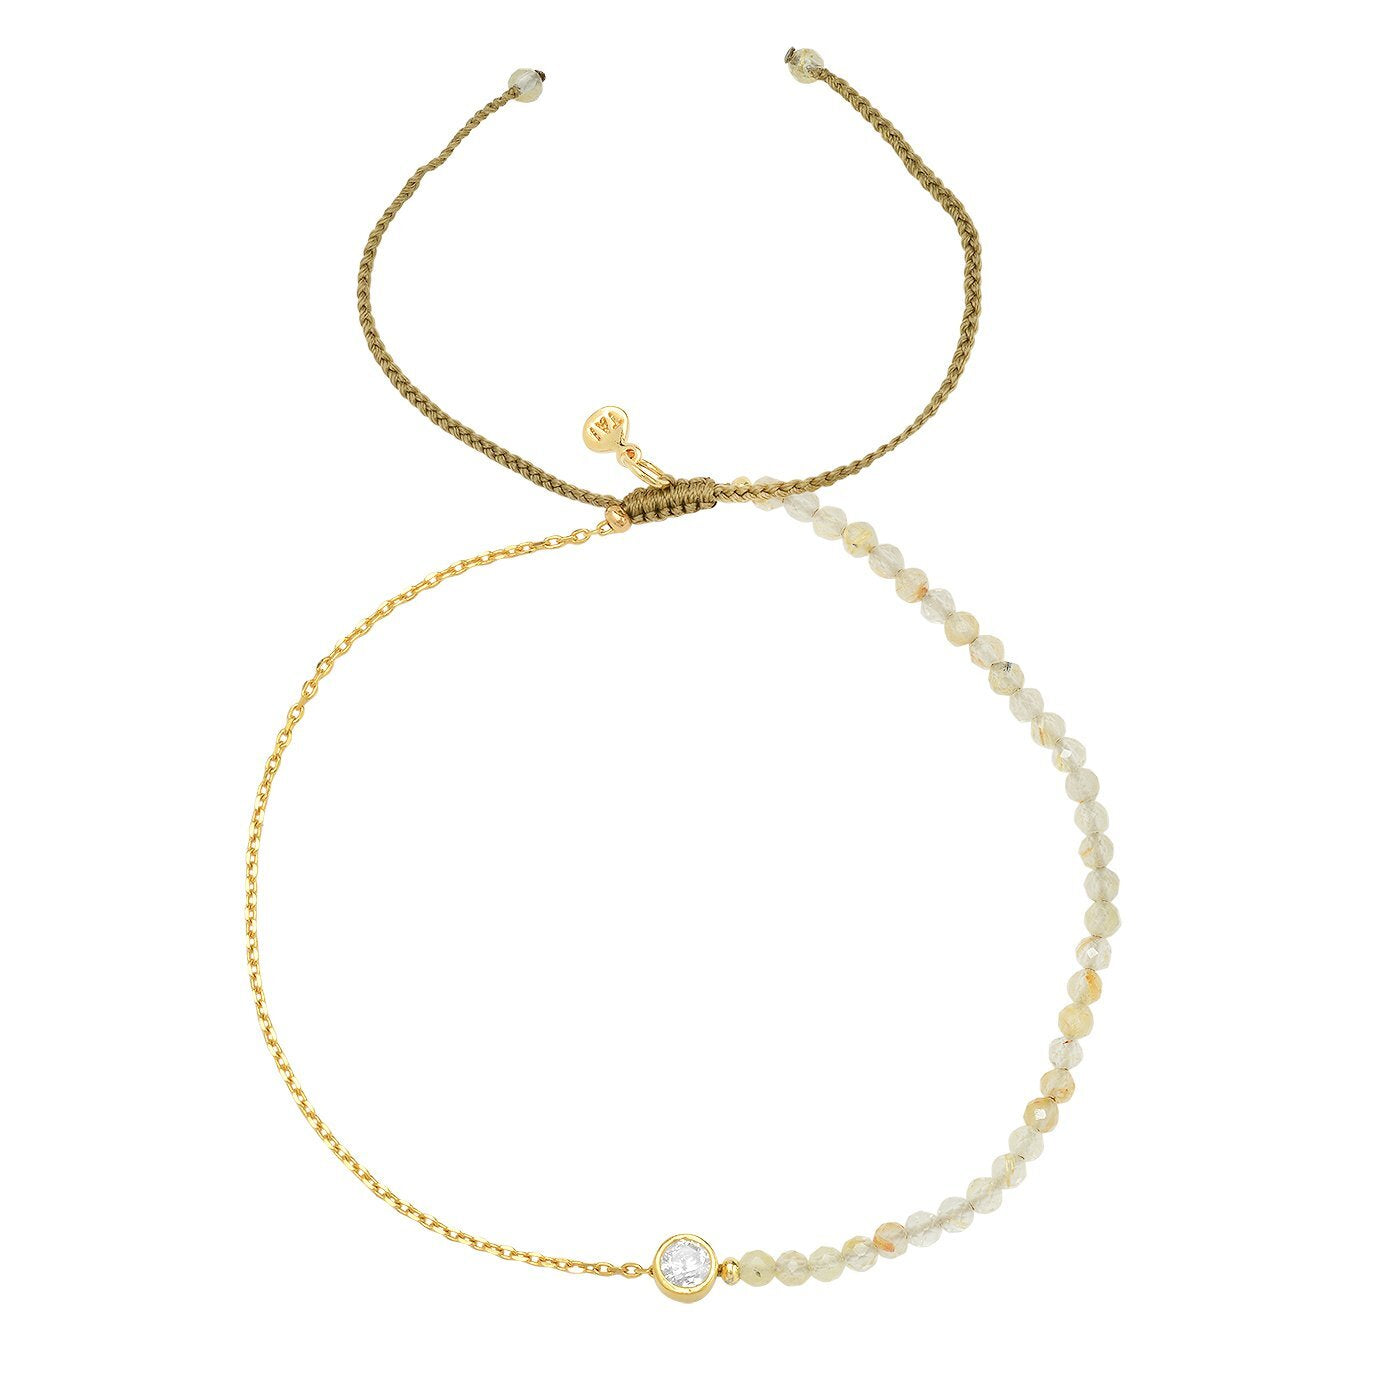 Nude woven pull-tie closure, stone beads, gold-plated brass chain